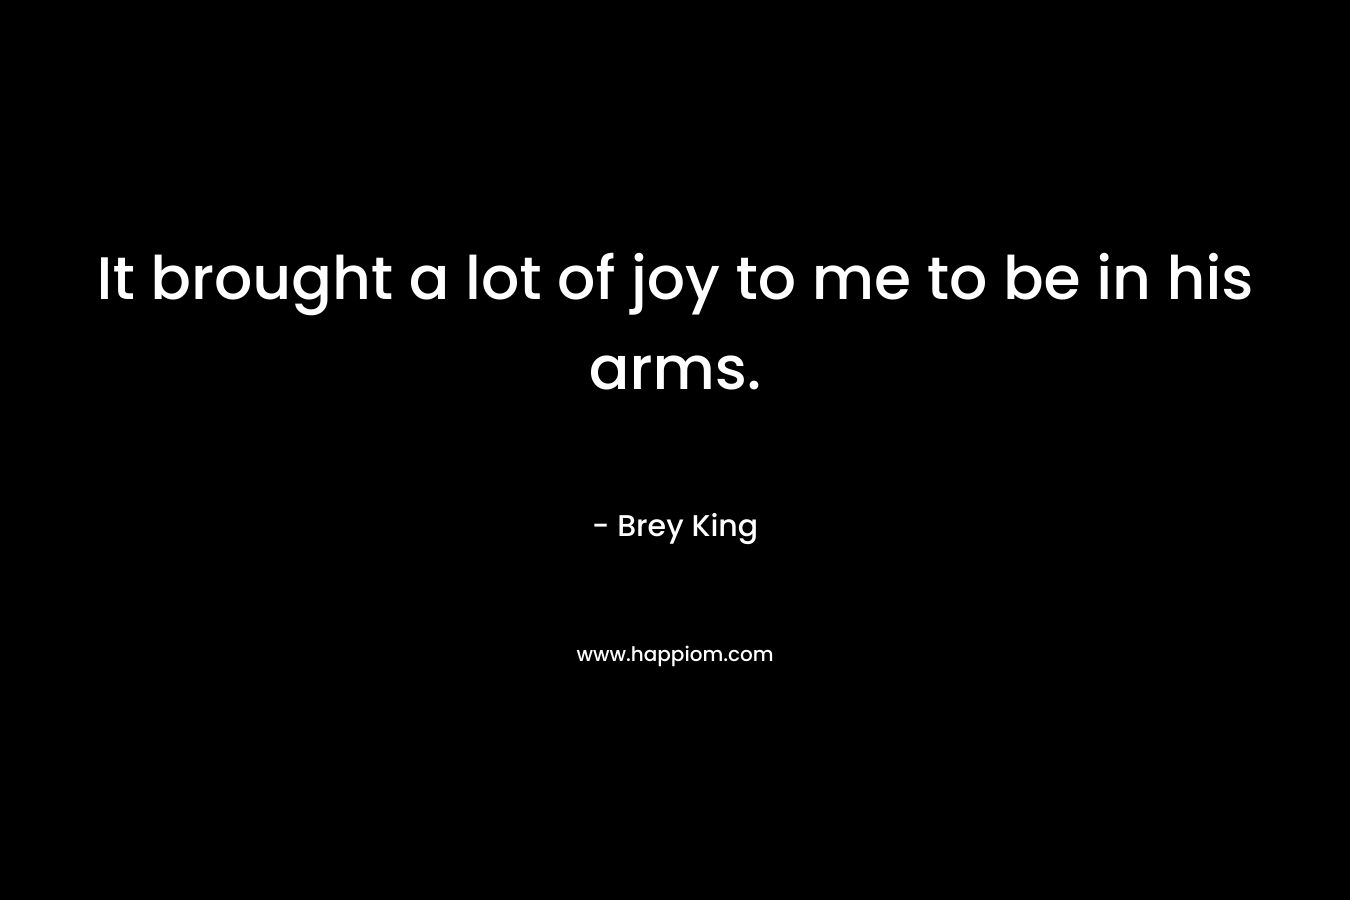 It brought a lot of joy to me to be in his arms. – Brey King